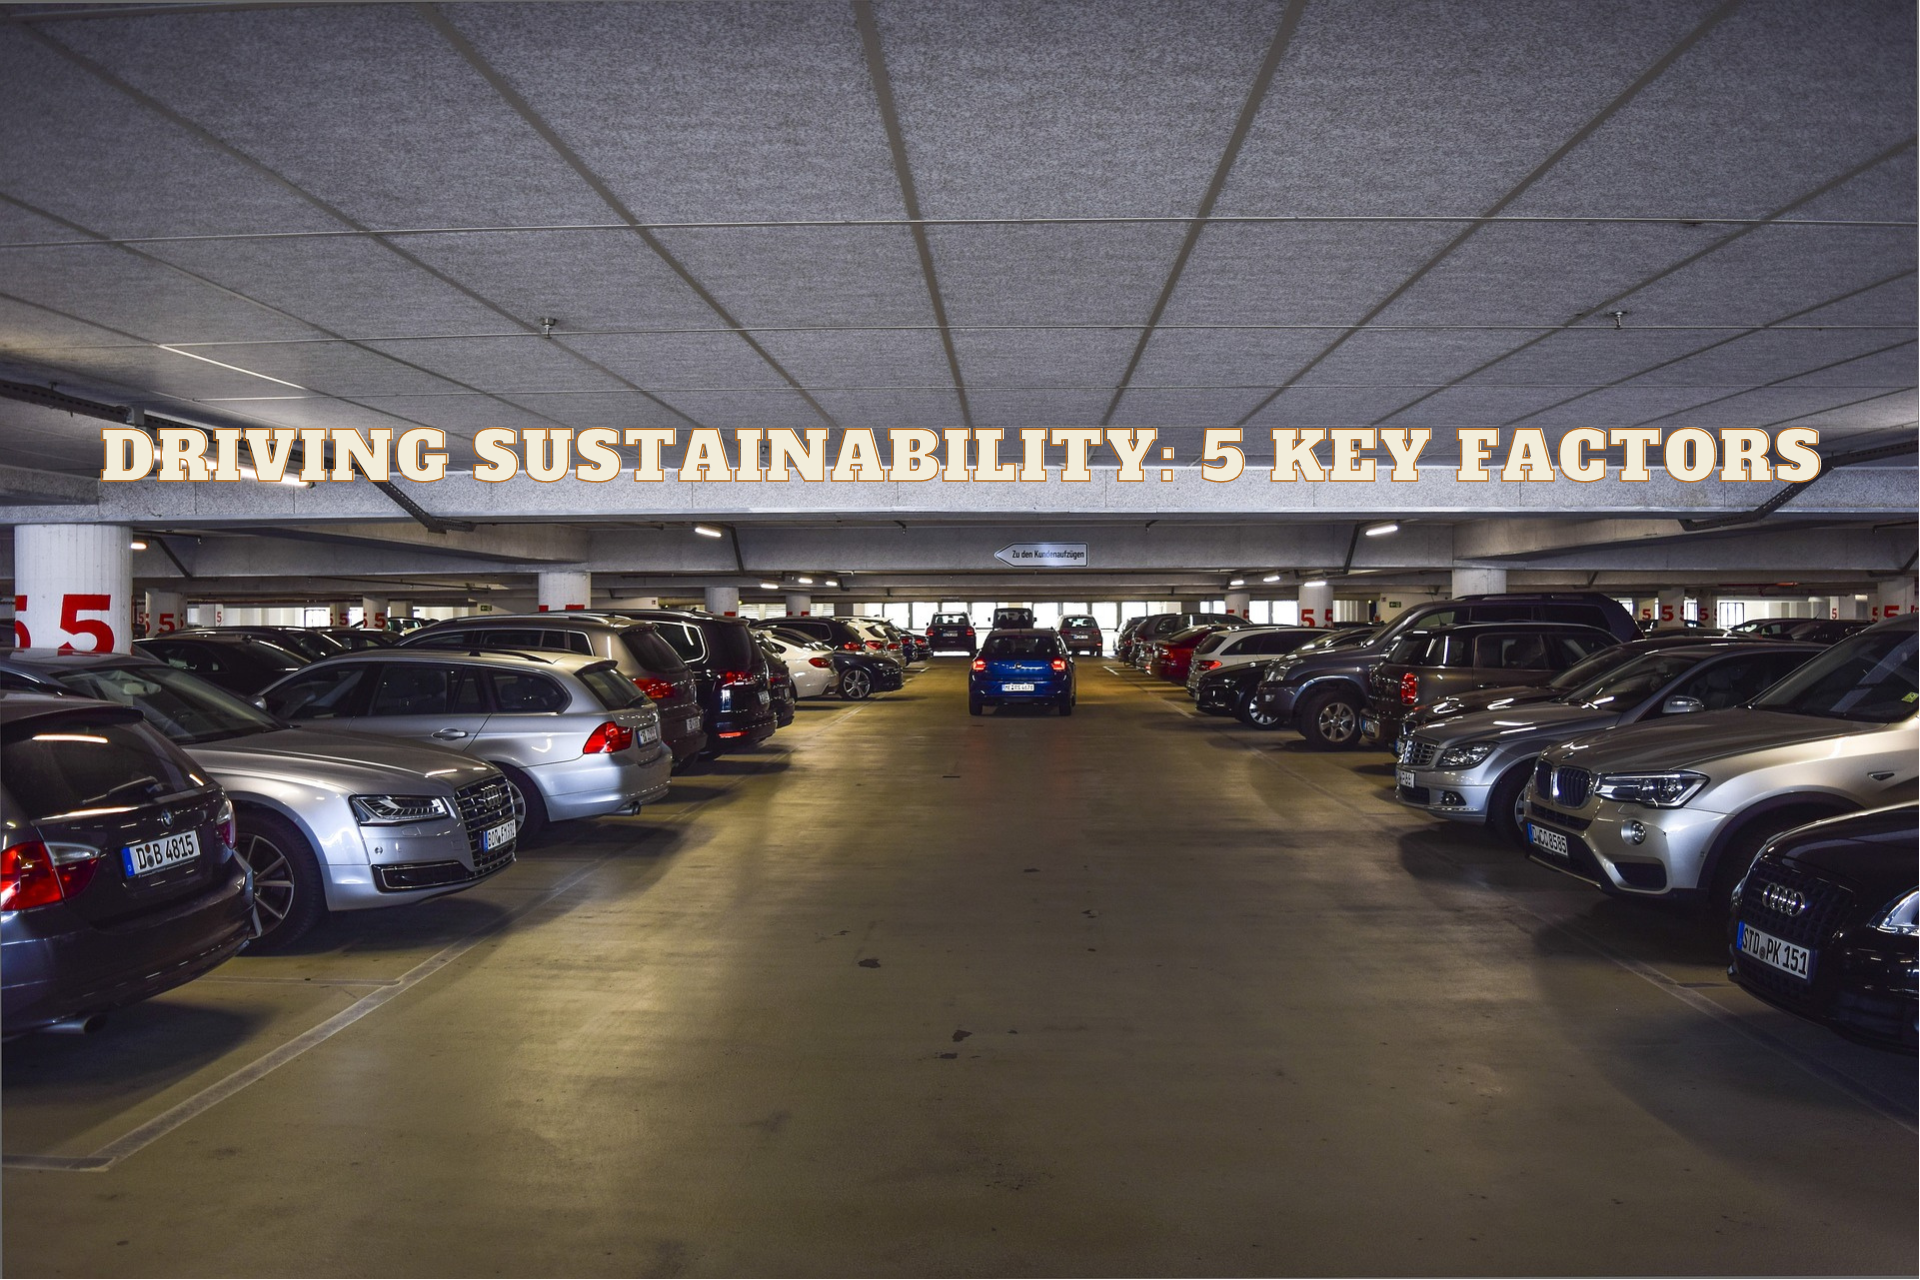 Driving Sustainability 5 Key Factors